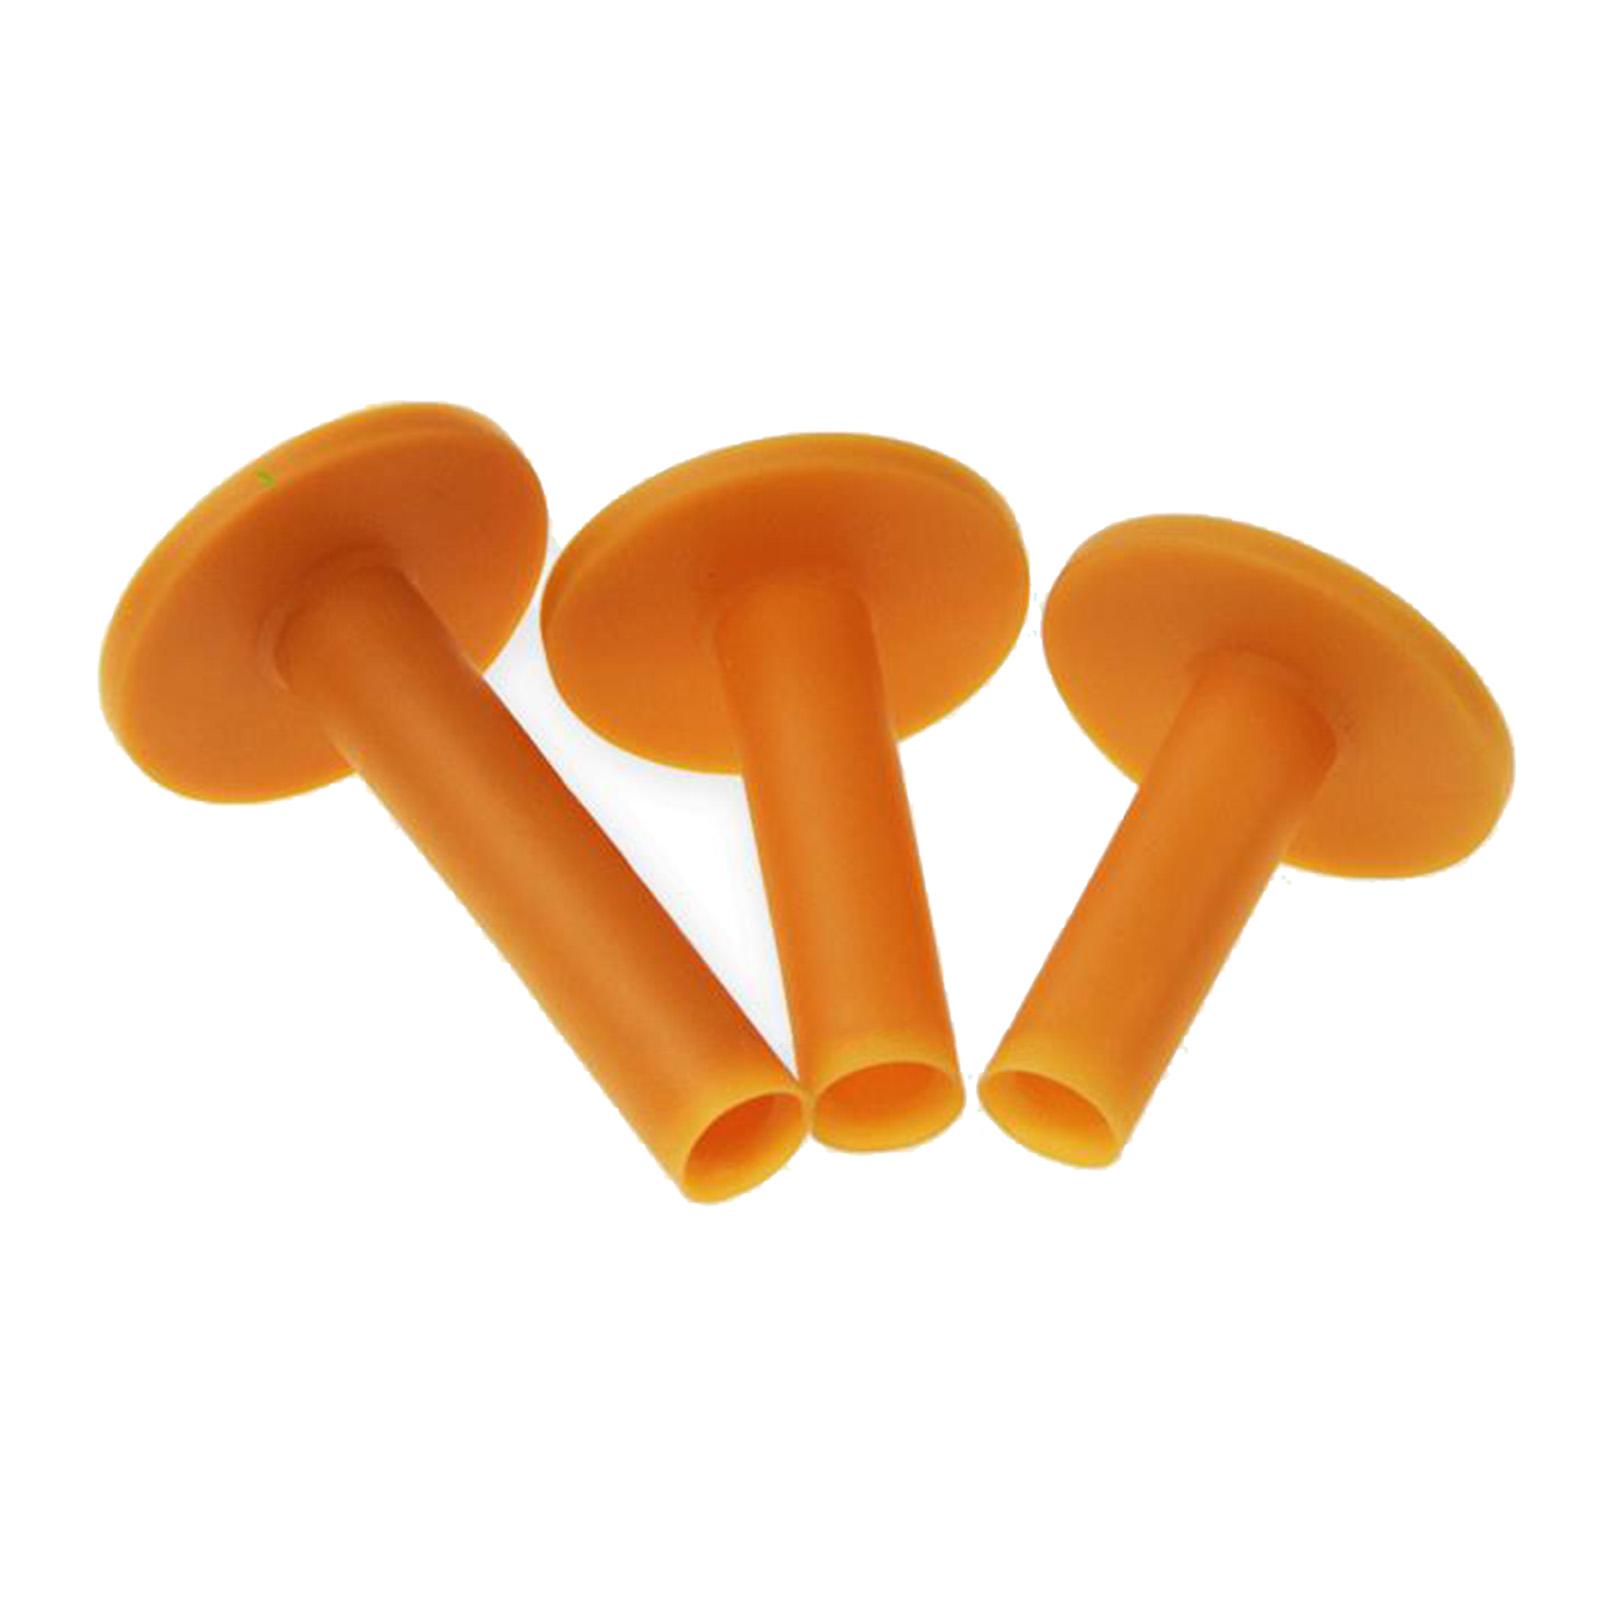 5pcs Rubber Driving Golf Tees Holder Rubber Driving Range Practice  85mm